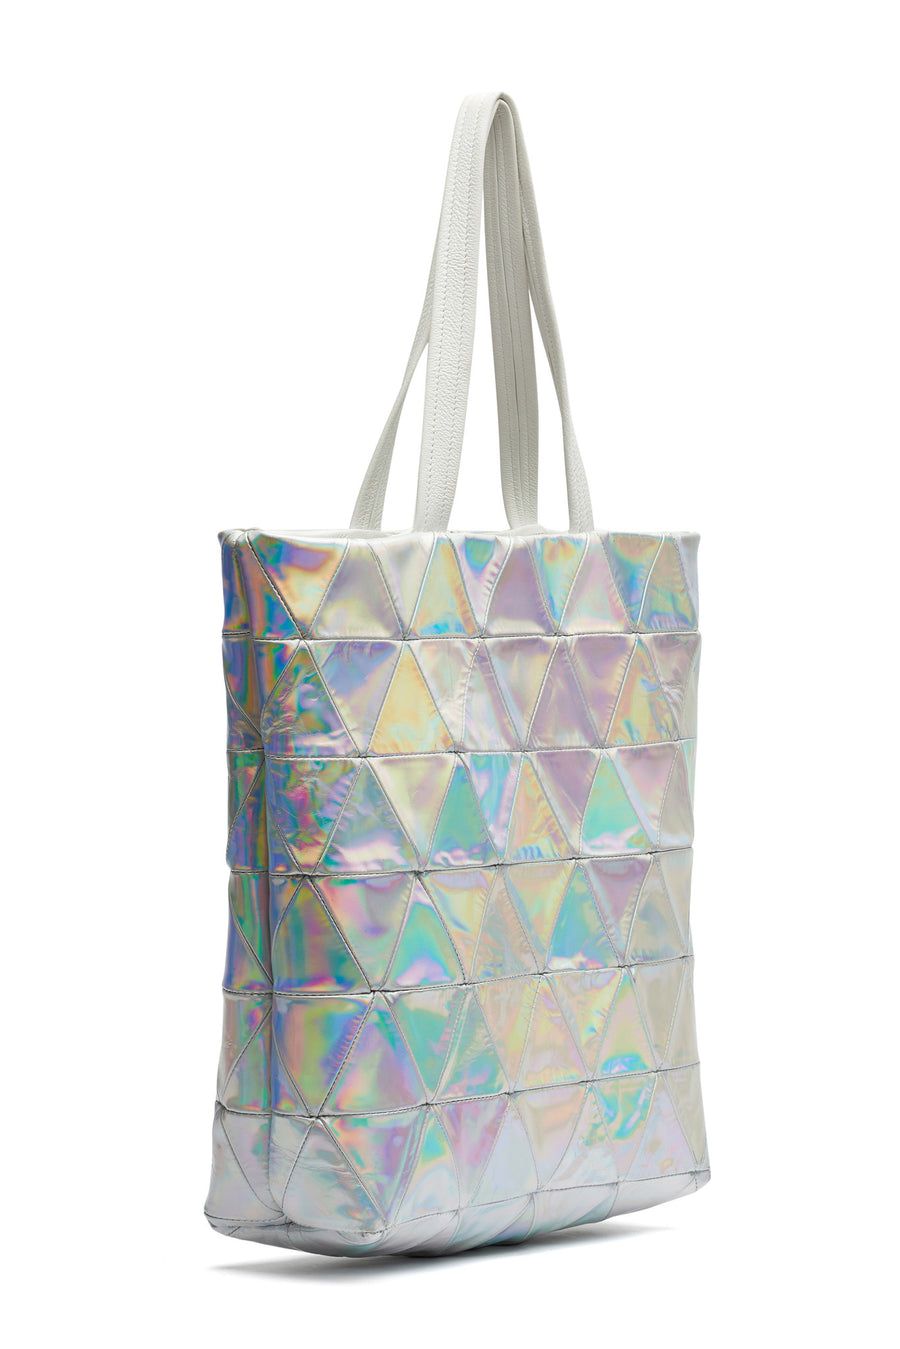 Reflective Shiny Mirror Patent Leather Triangle Patchwork Tote Wendy Nichol Designer Handbag Purse Tote Handmade in NYC New York City Strong durable Handle interior pocket Triangles High Quality Leather Silver Rainbow Metallic Holographic